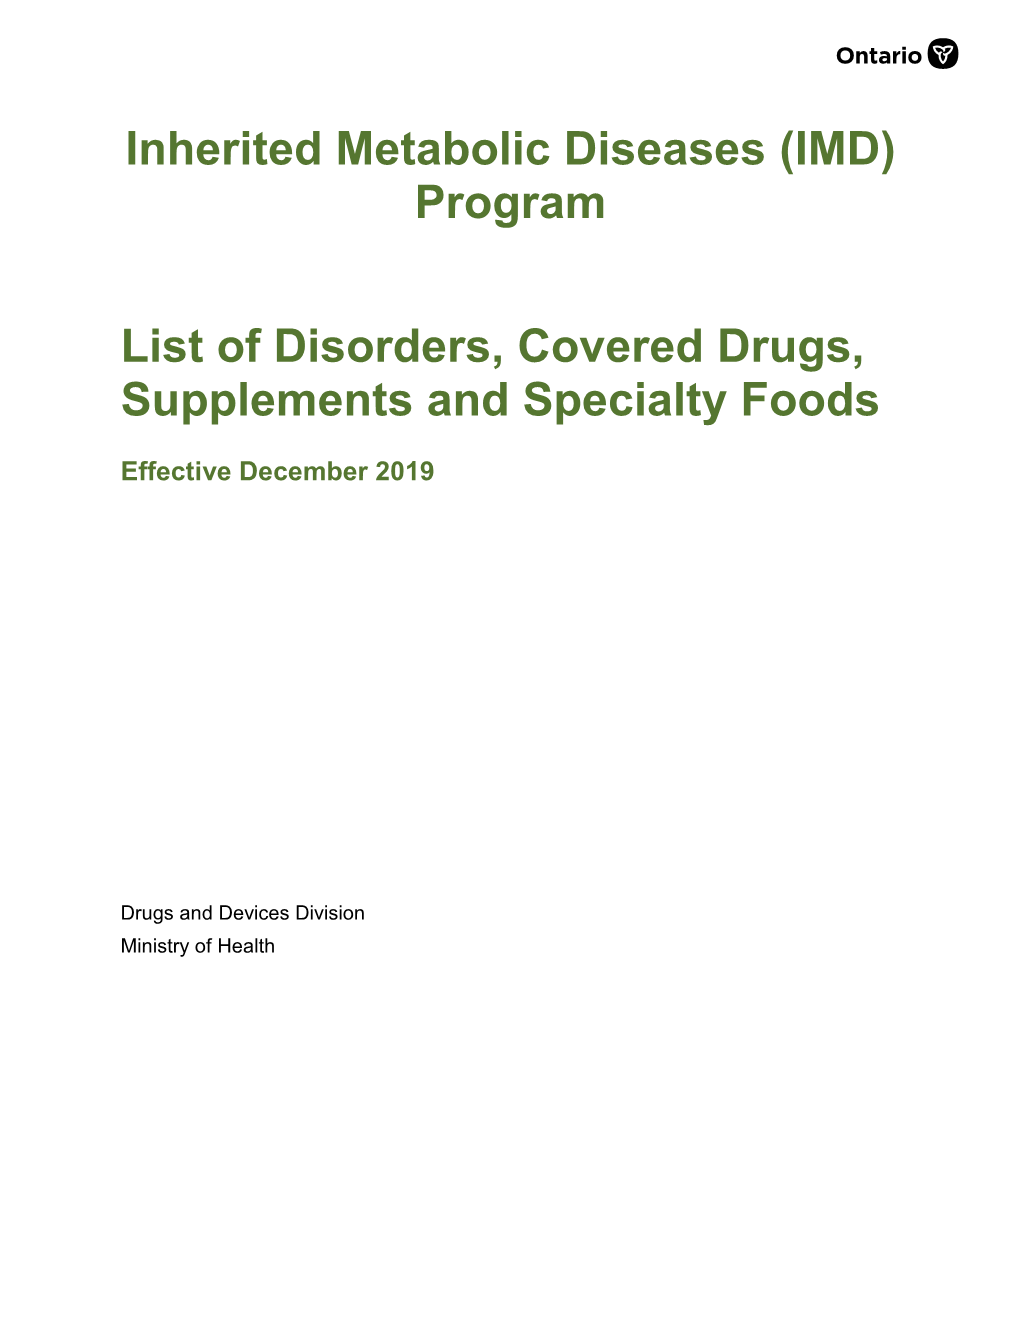 Inherited Metabolic Diseases (IMD) Program List of Disorders, Covered Drugs, Supplements and Specialty Foods